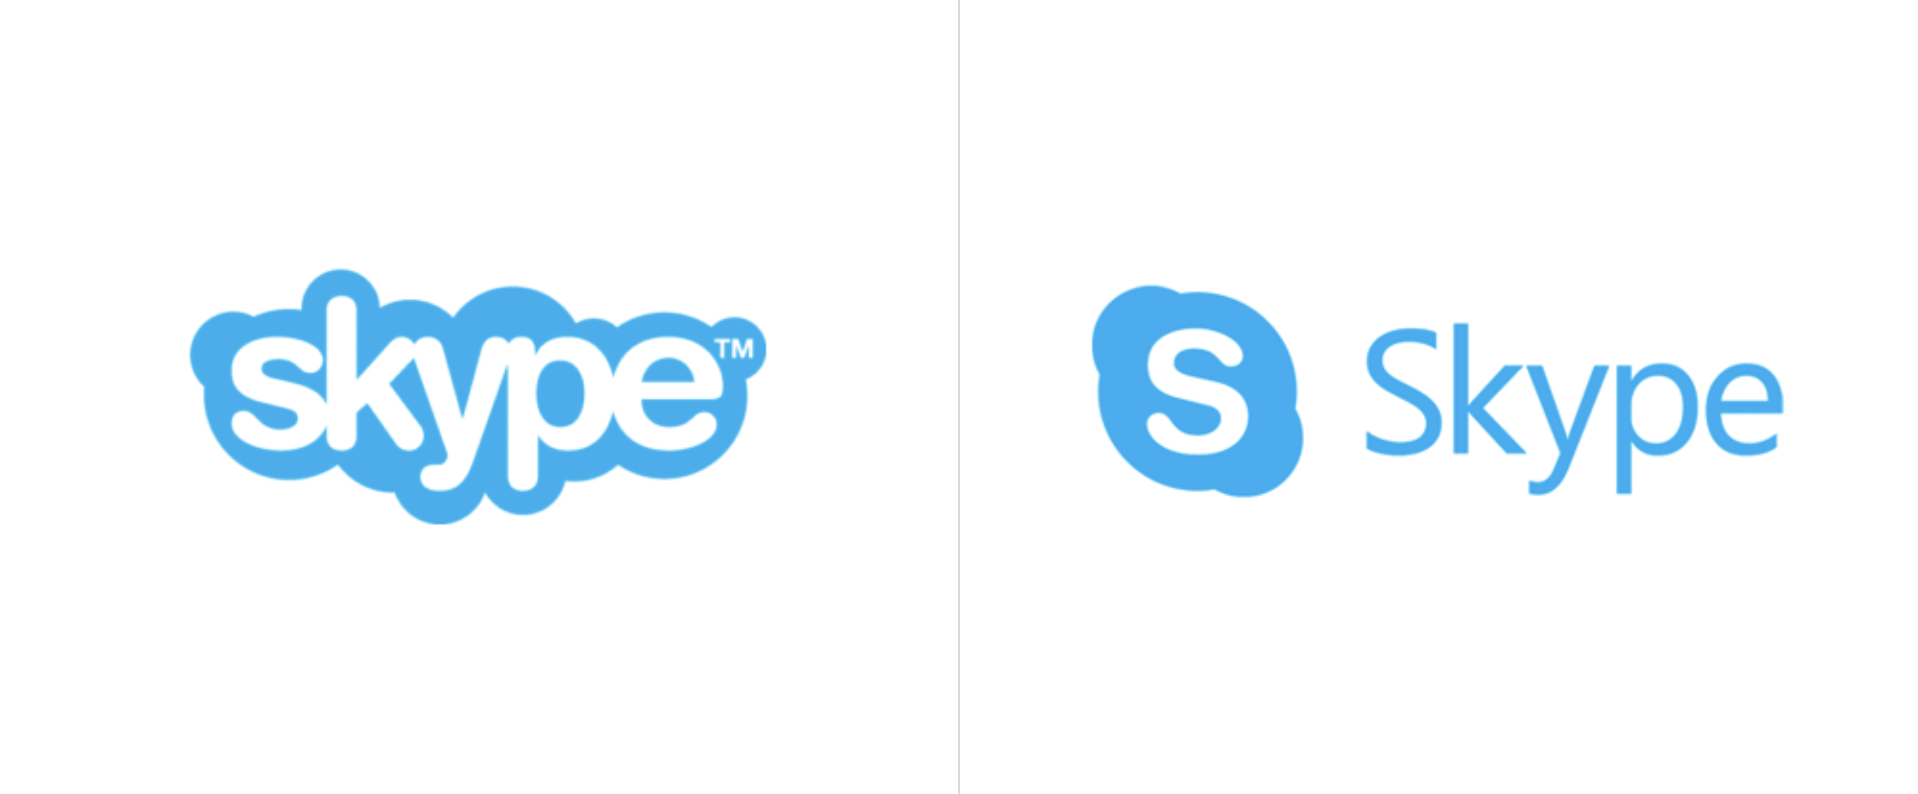 Old vs New Logo - Microsoft introduces a new Skype logo ahead of the app's big ...